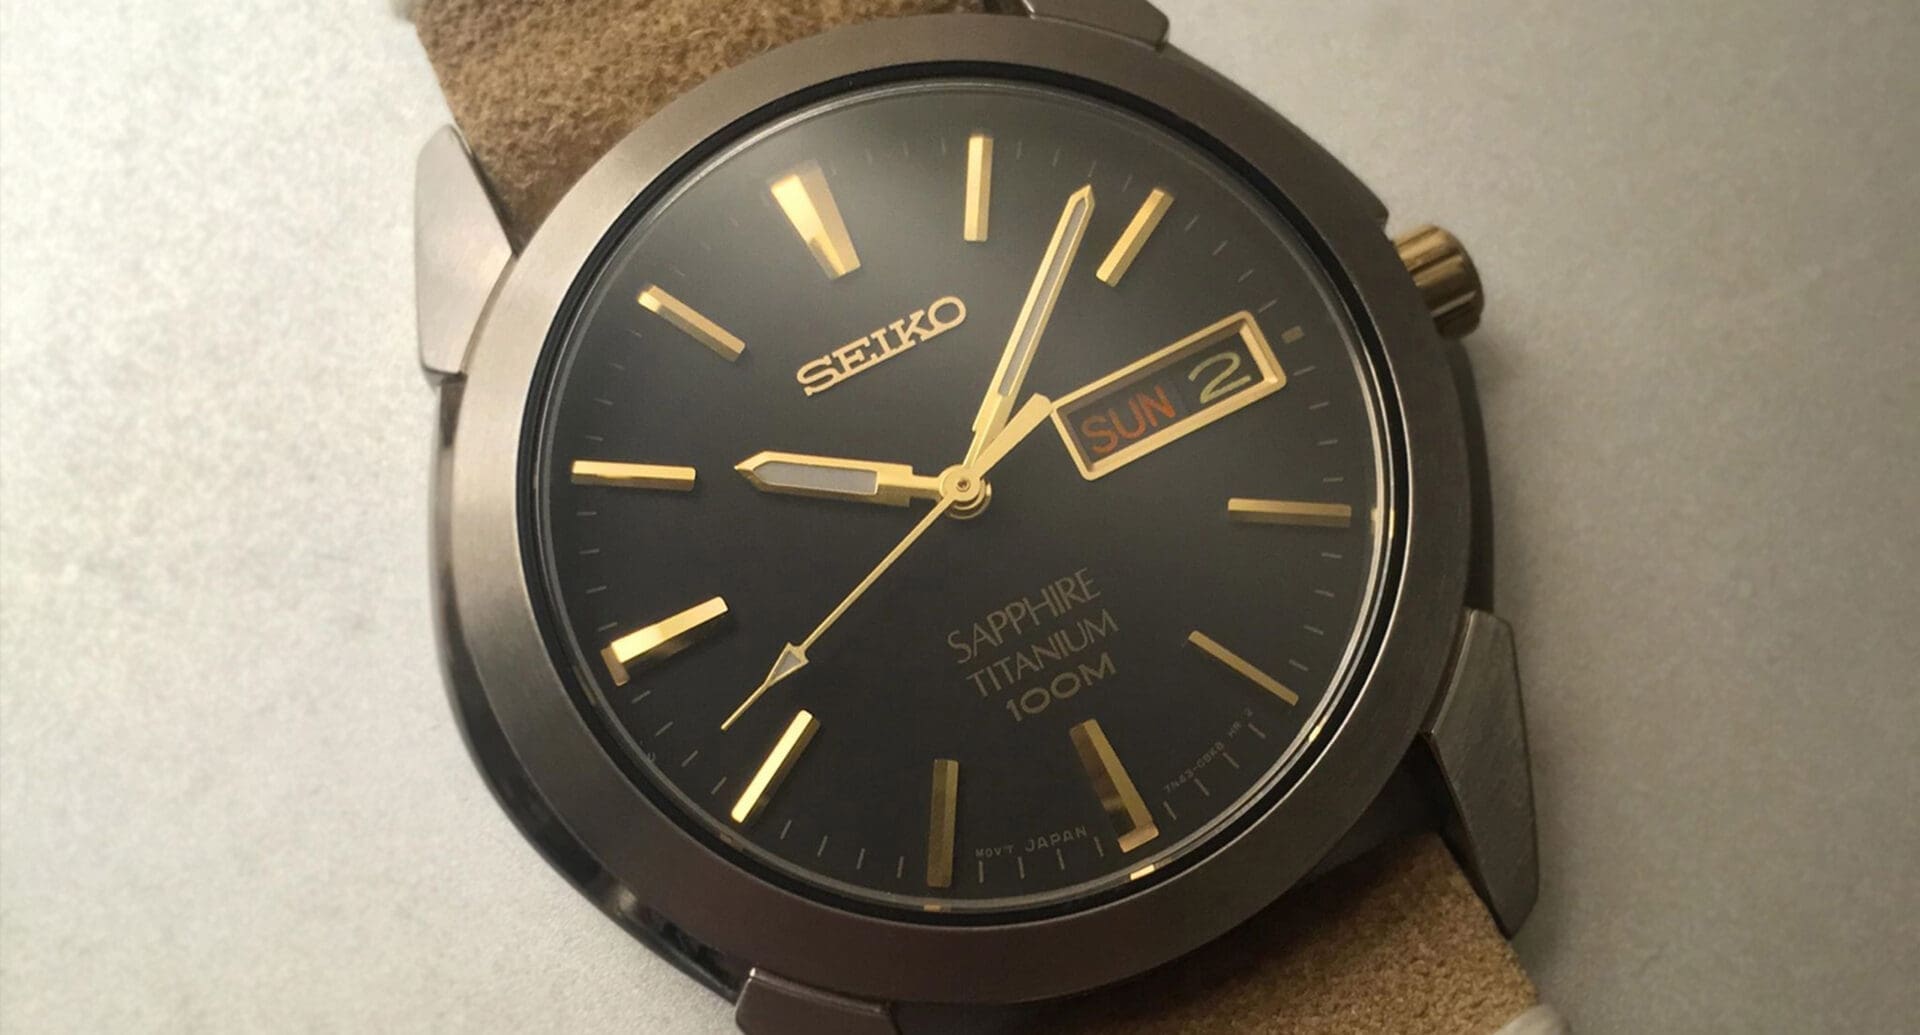 How did my $200 Seiko become worth $1200?